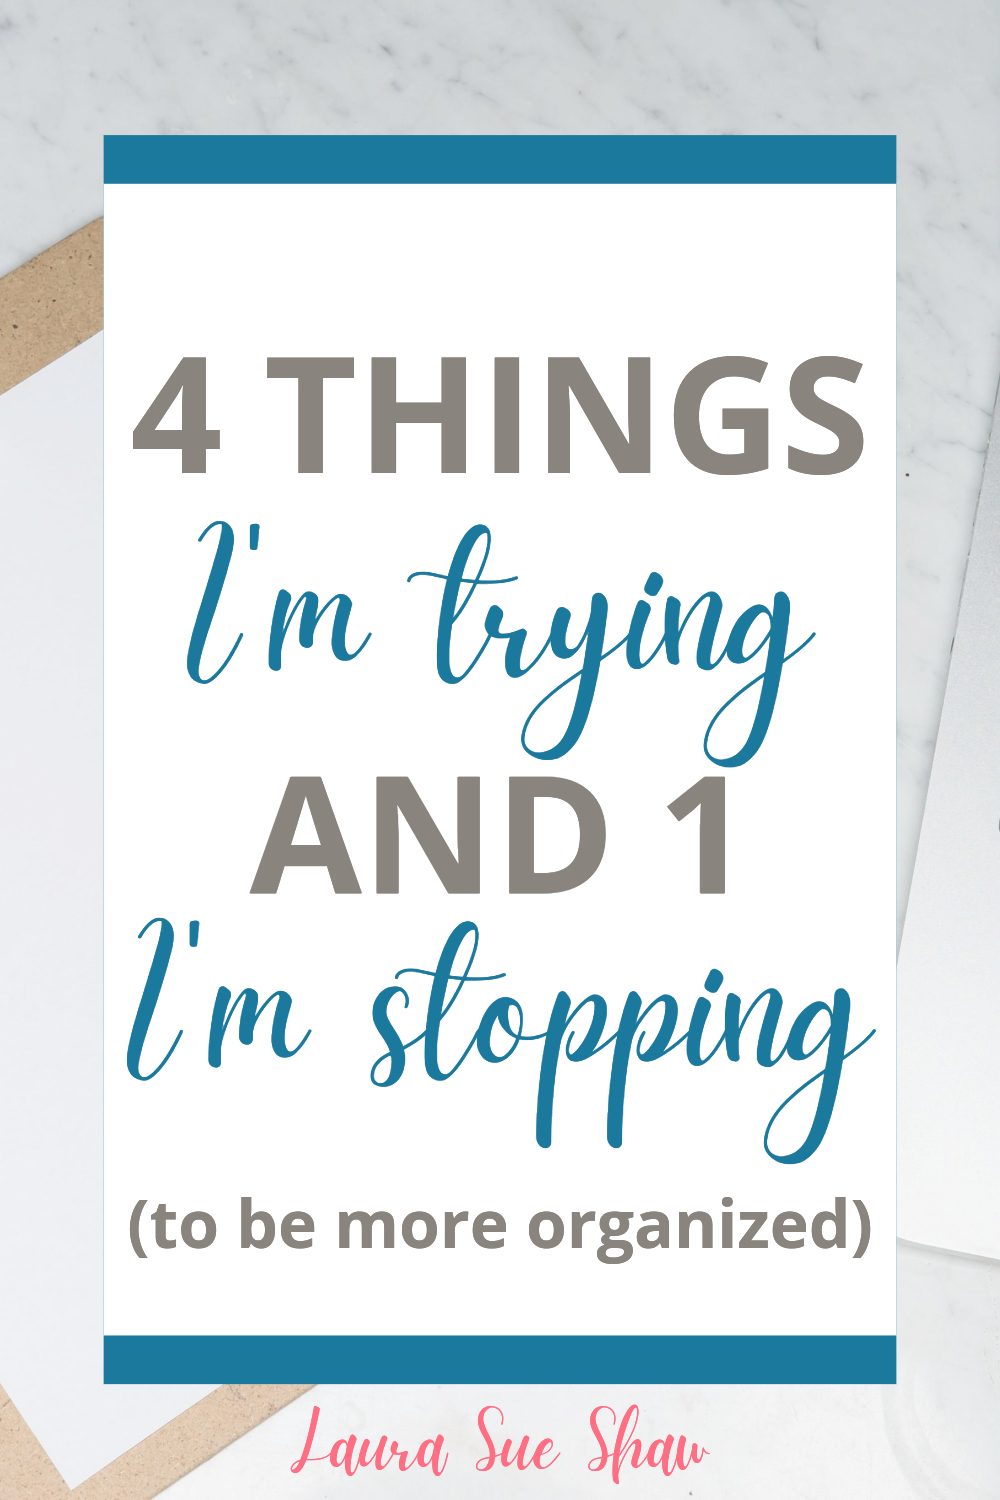 These are some things I’ve been trying or working on in order to be a little more organized and productive.